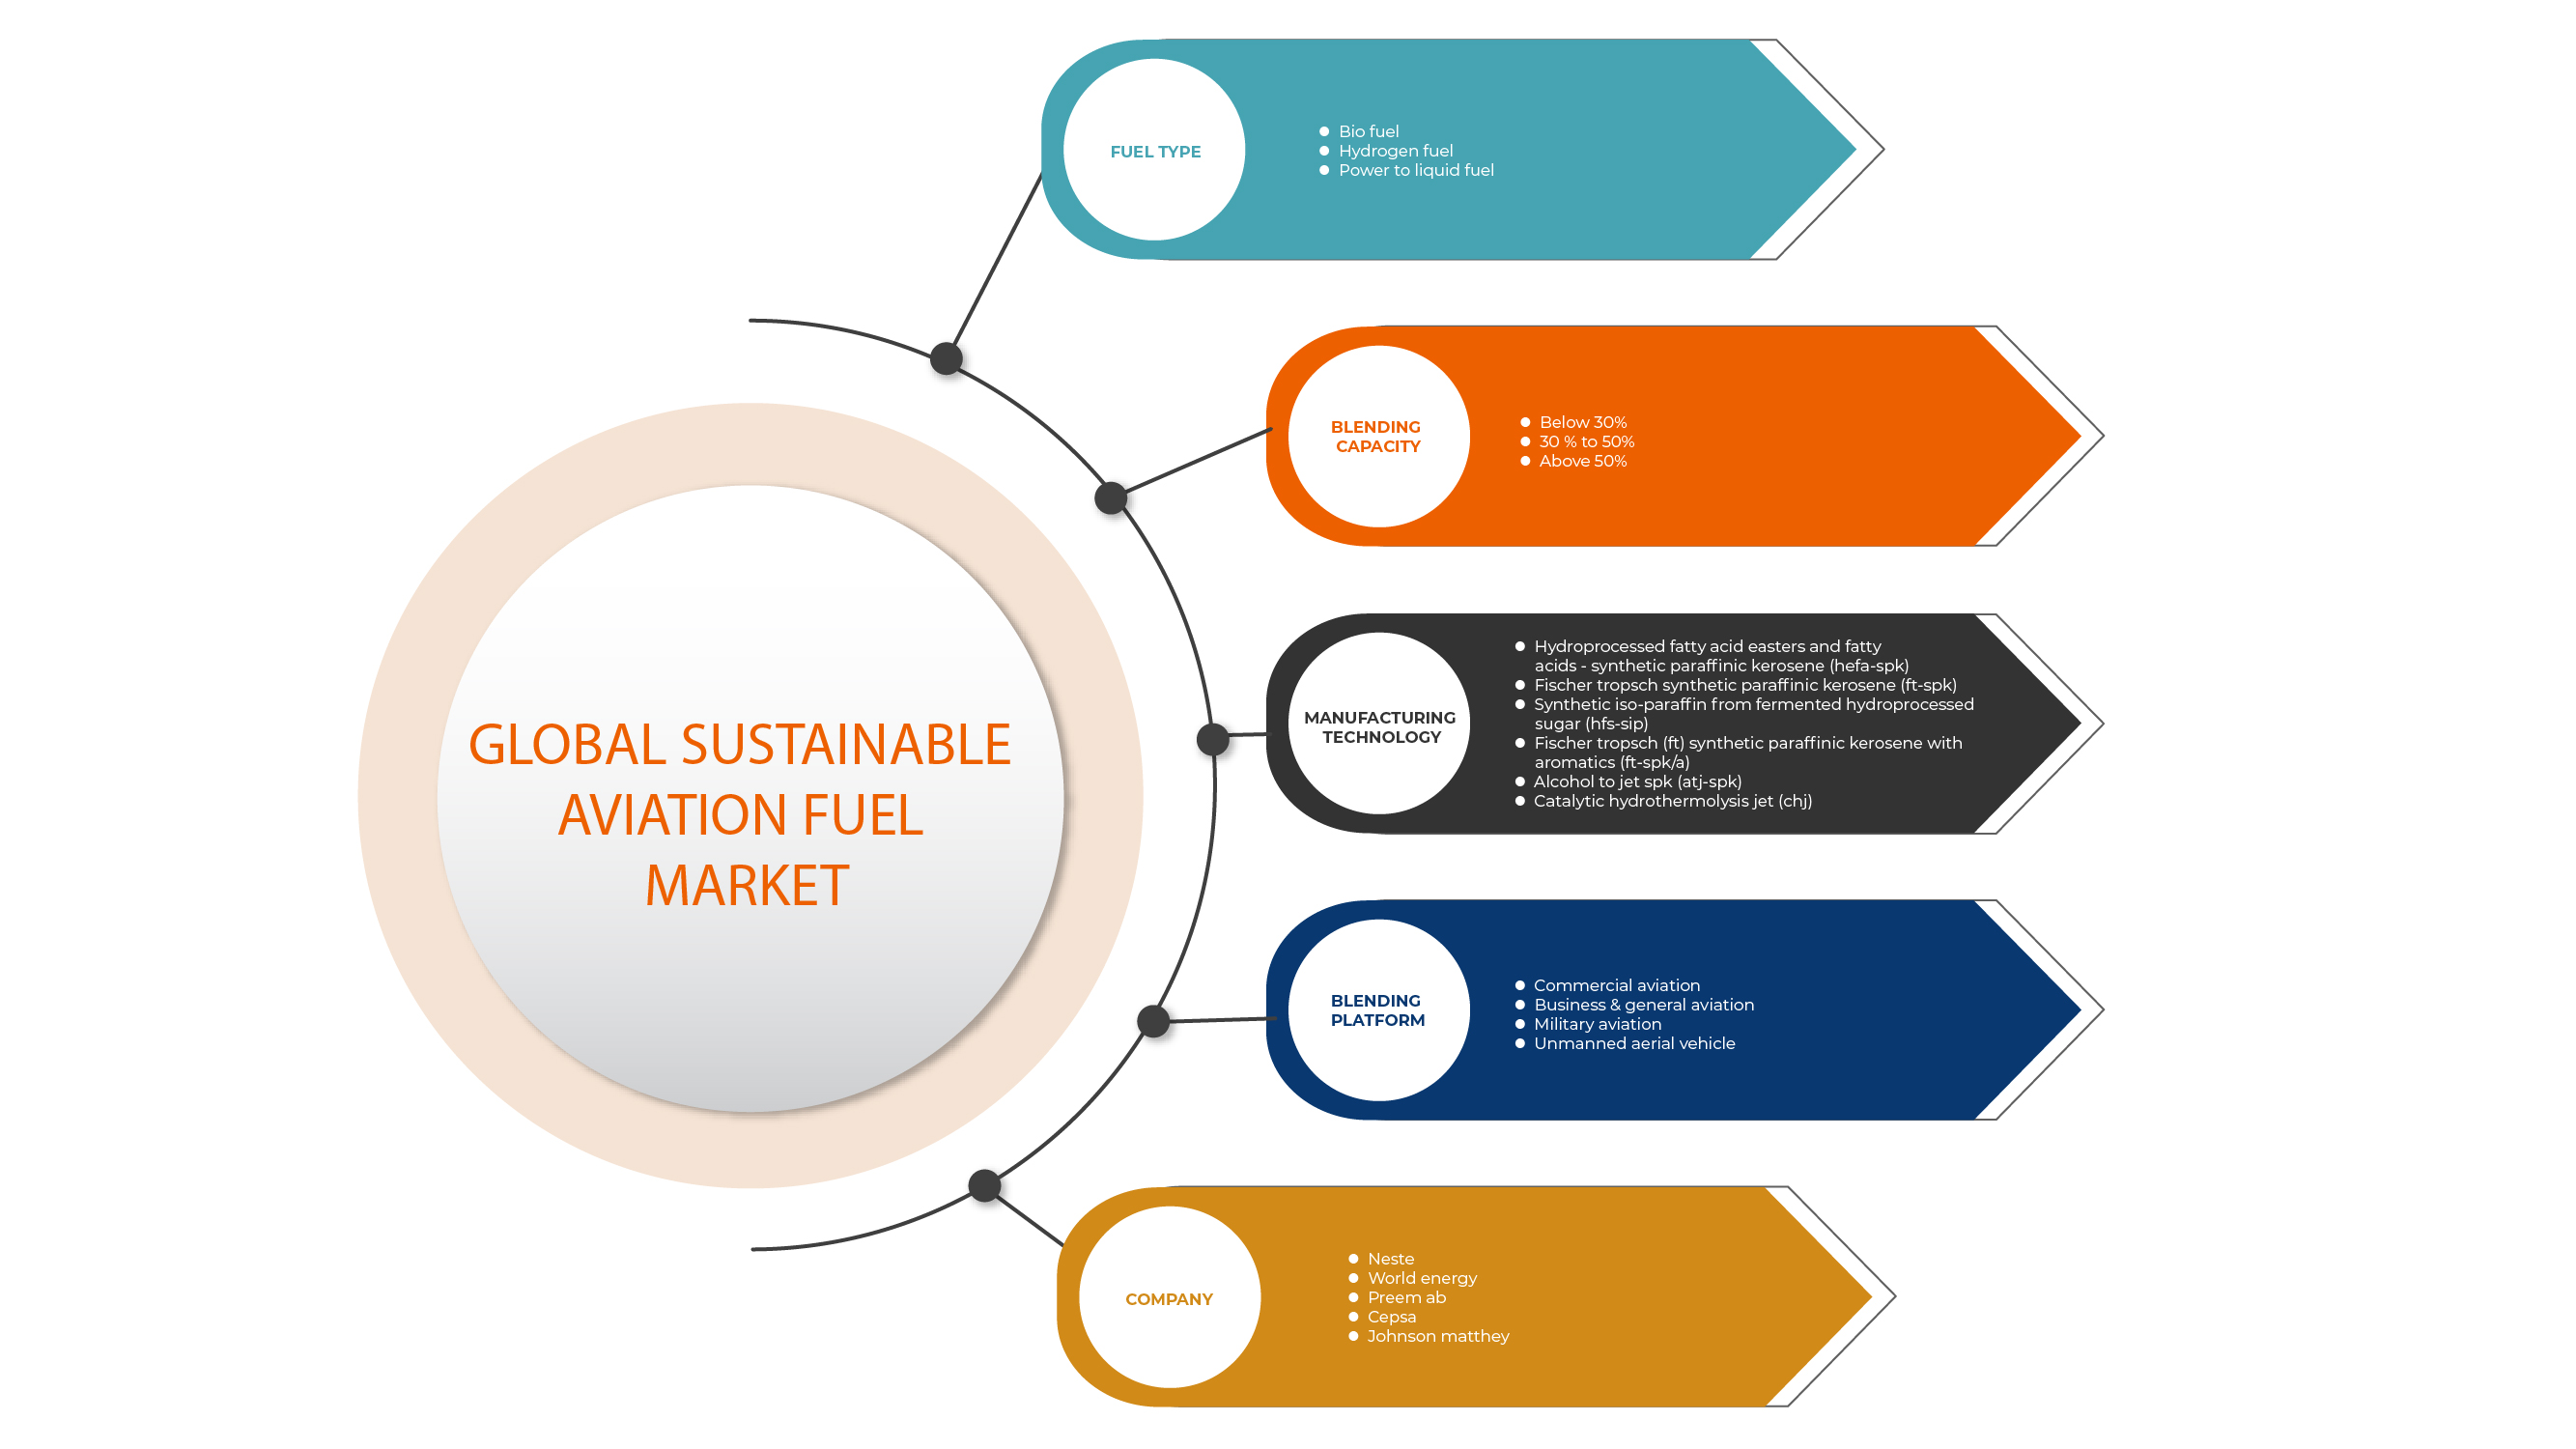 Asia-Pacific Sustainable Aviation Fuel Market